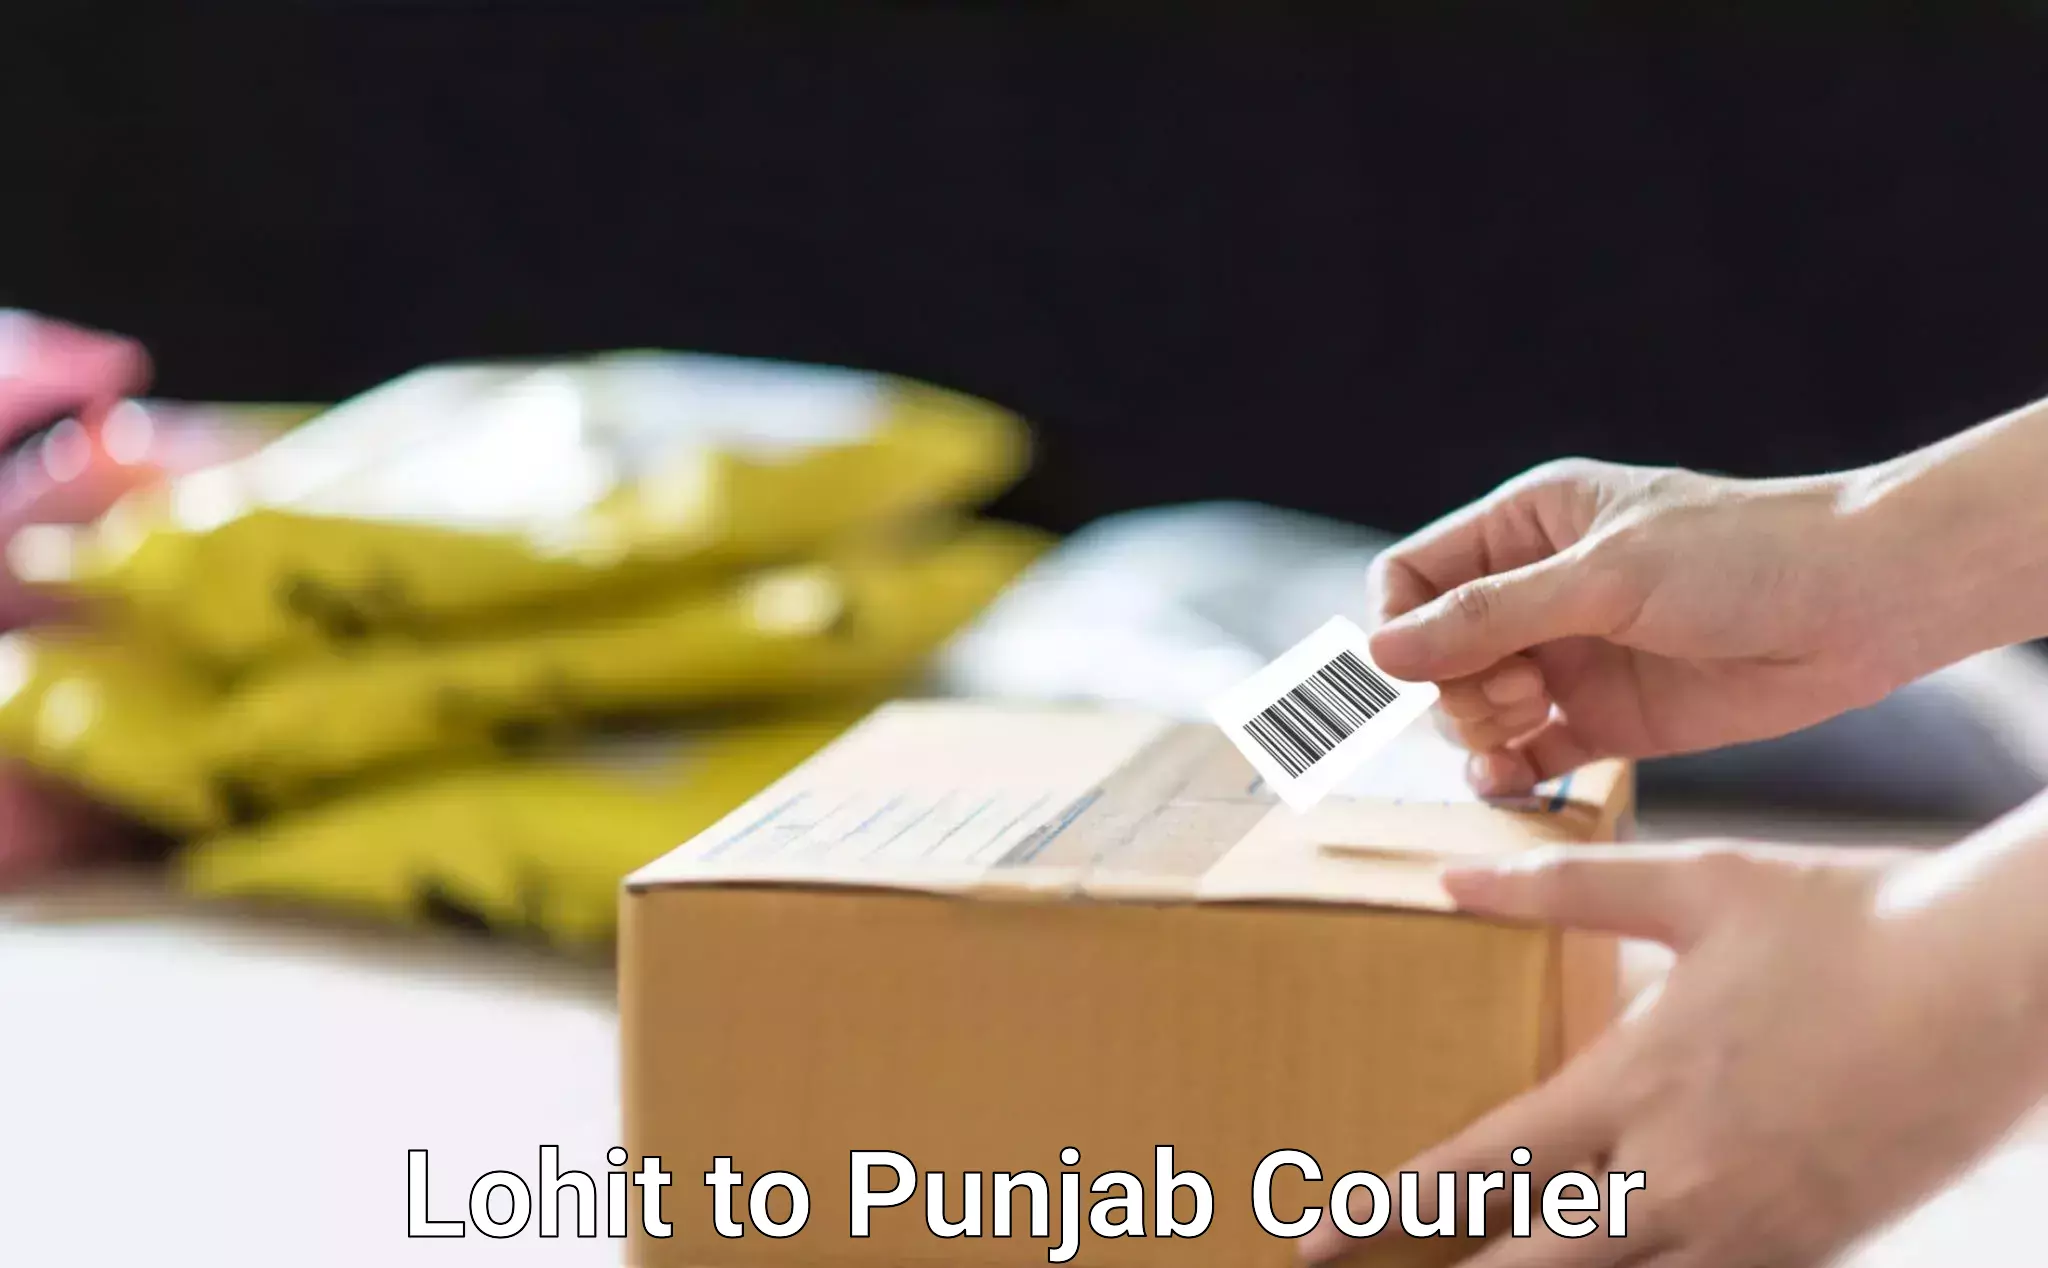 Express package services Lohit to Central University of Punjab Bathinda